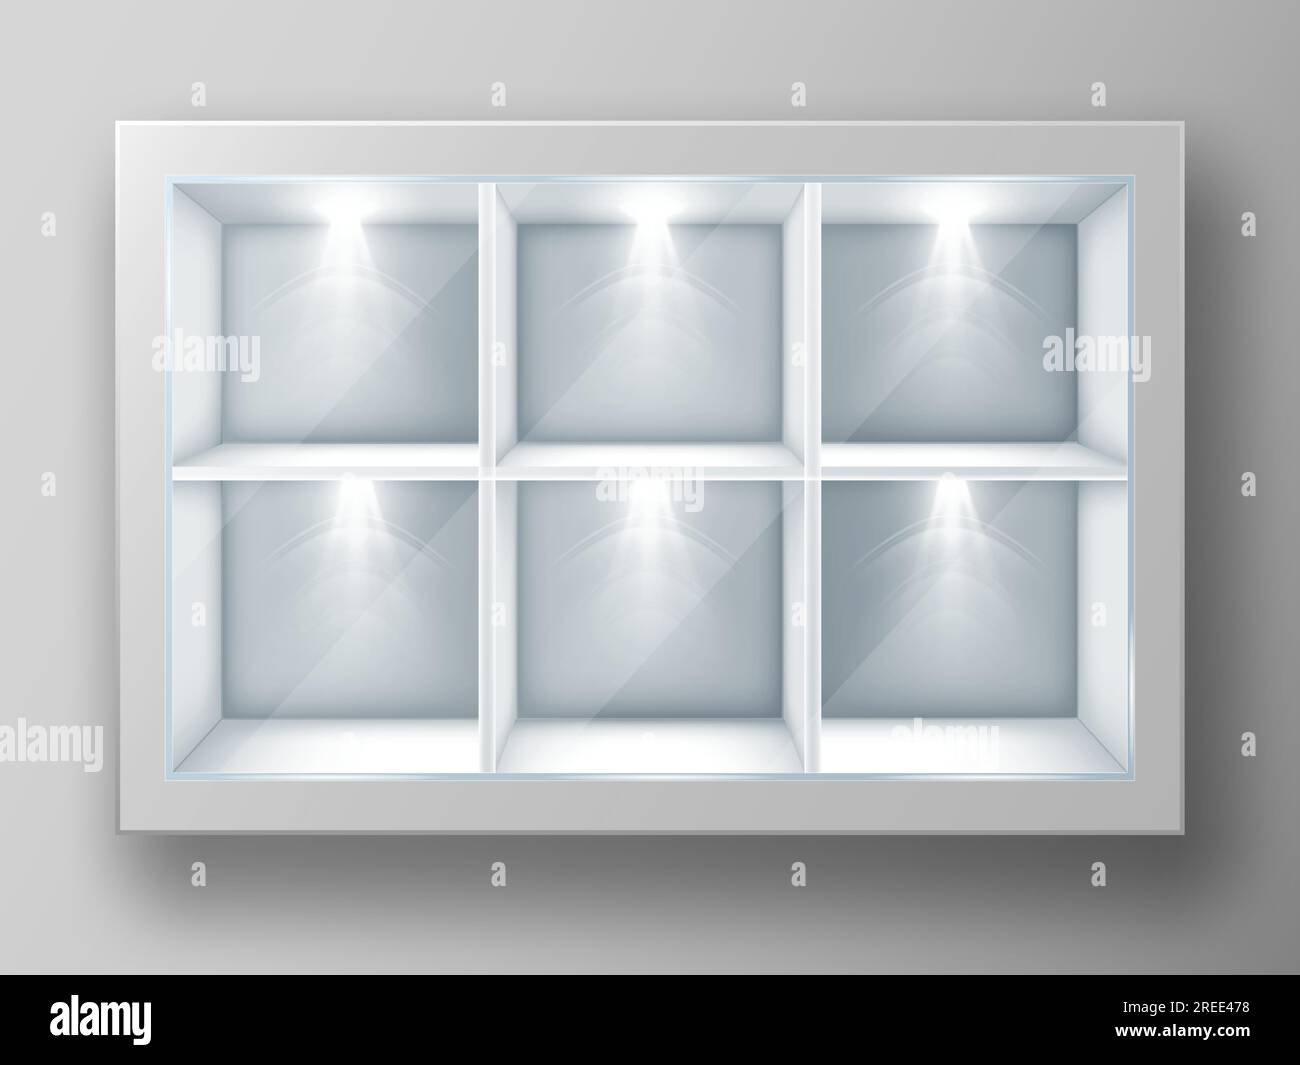 White showcase with square shelves in shop or gallery. Vector realistic mockup of empty glass display stand or bookshelf illuminated by spotlights for advertising or museum exhibition Stock Vector